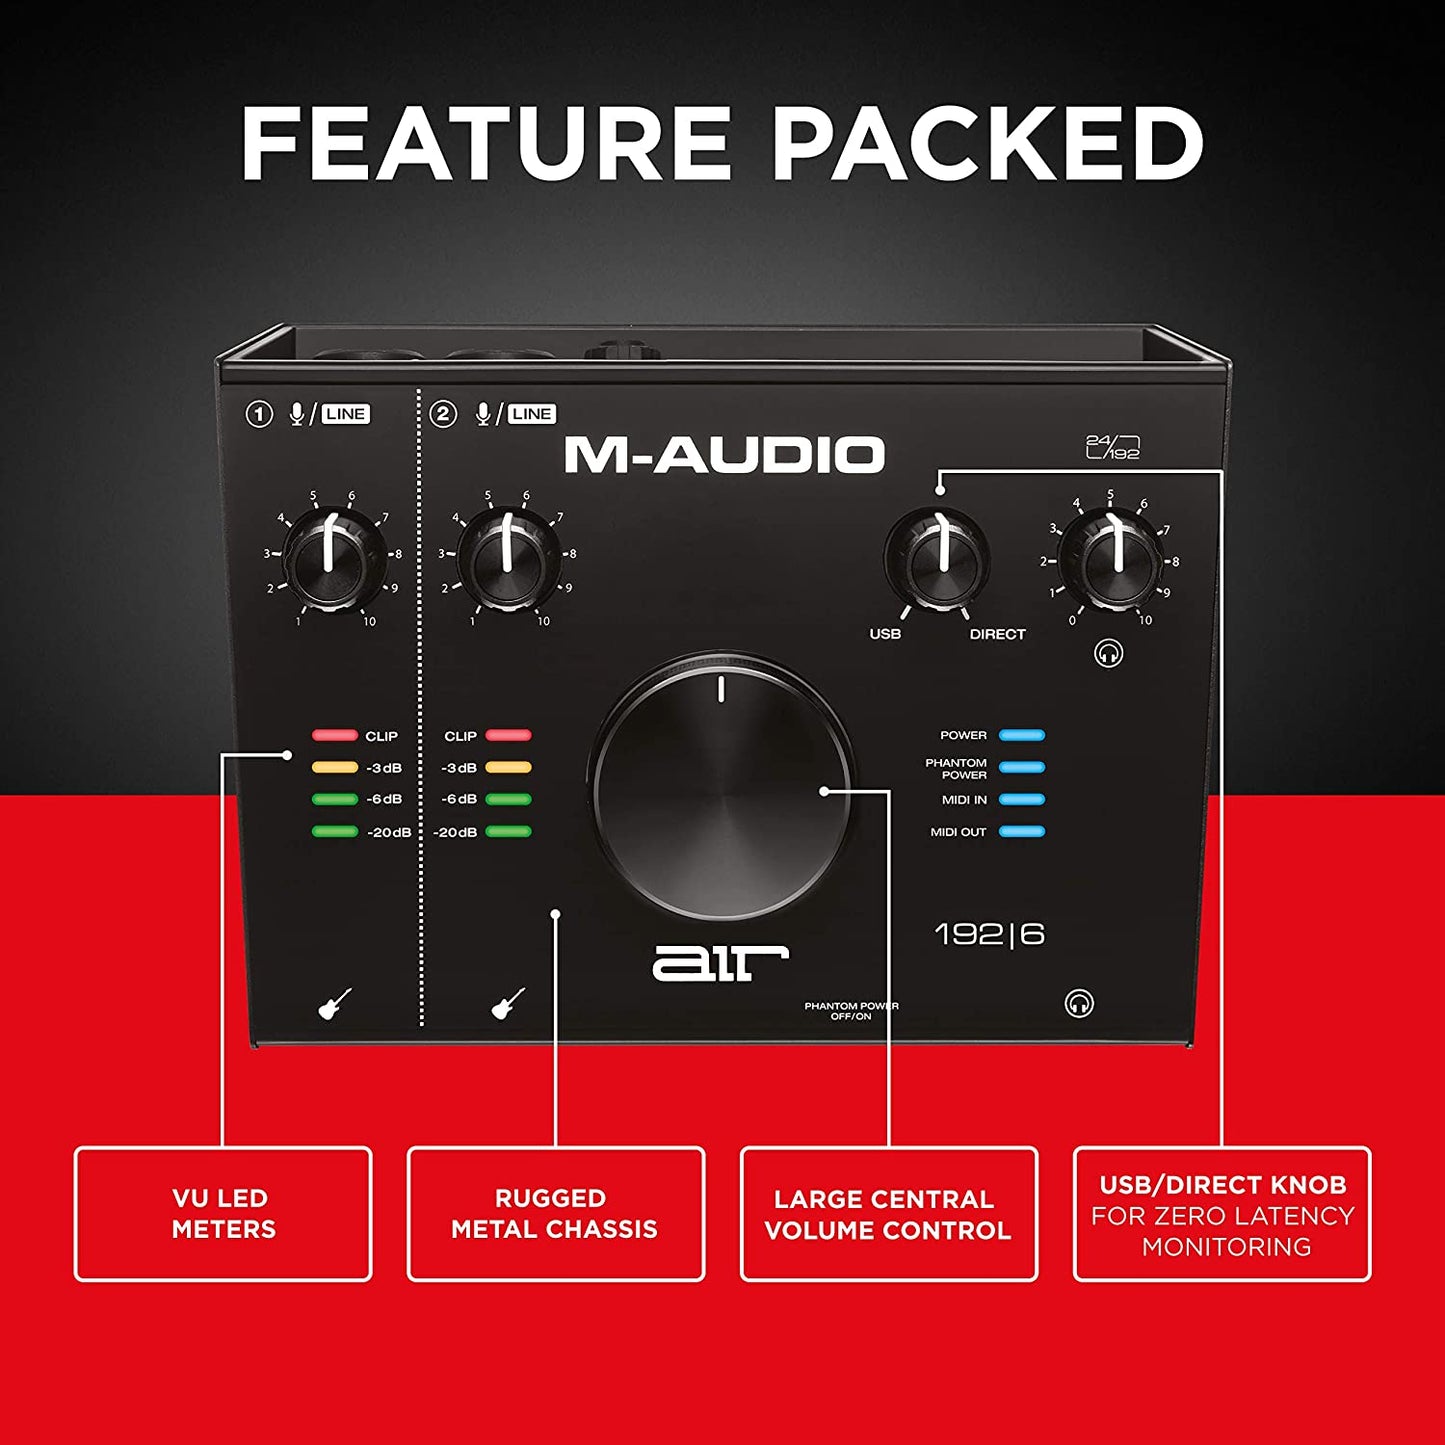 M-Audio AIR 192|6 2-In 2-Out 24 / 192 USB Audio / MIDI Interface with Recording Software from Pro-Tools & Ableton Live, Plus Studio-Grade FX & Instruments